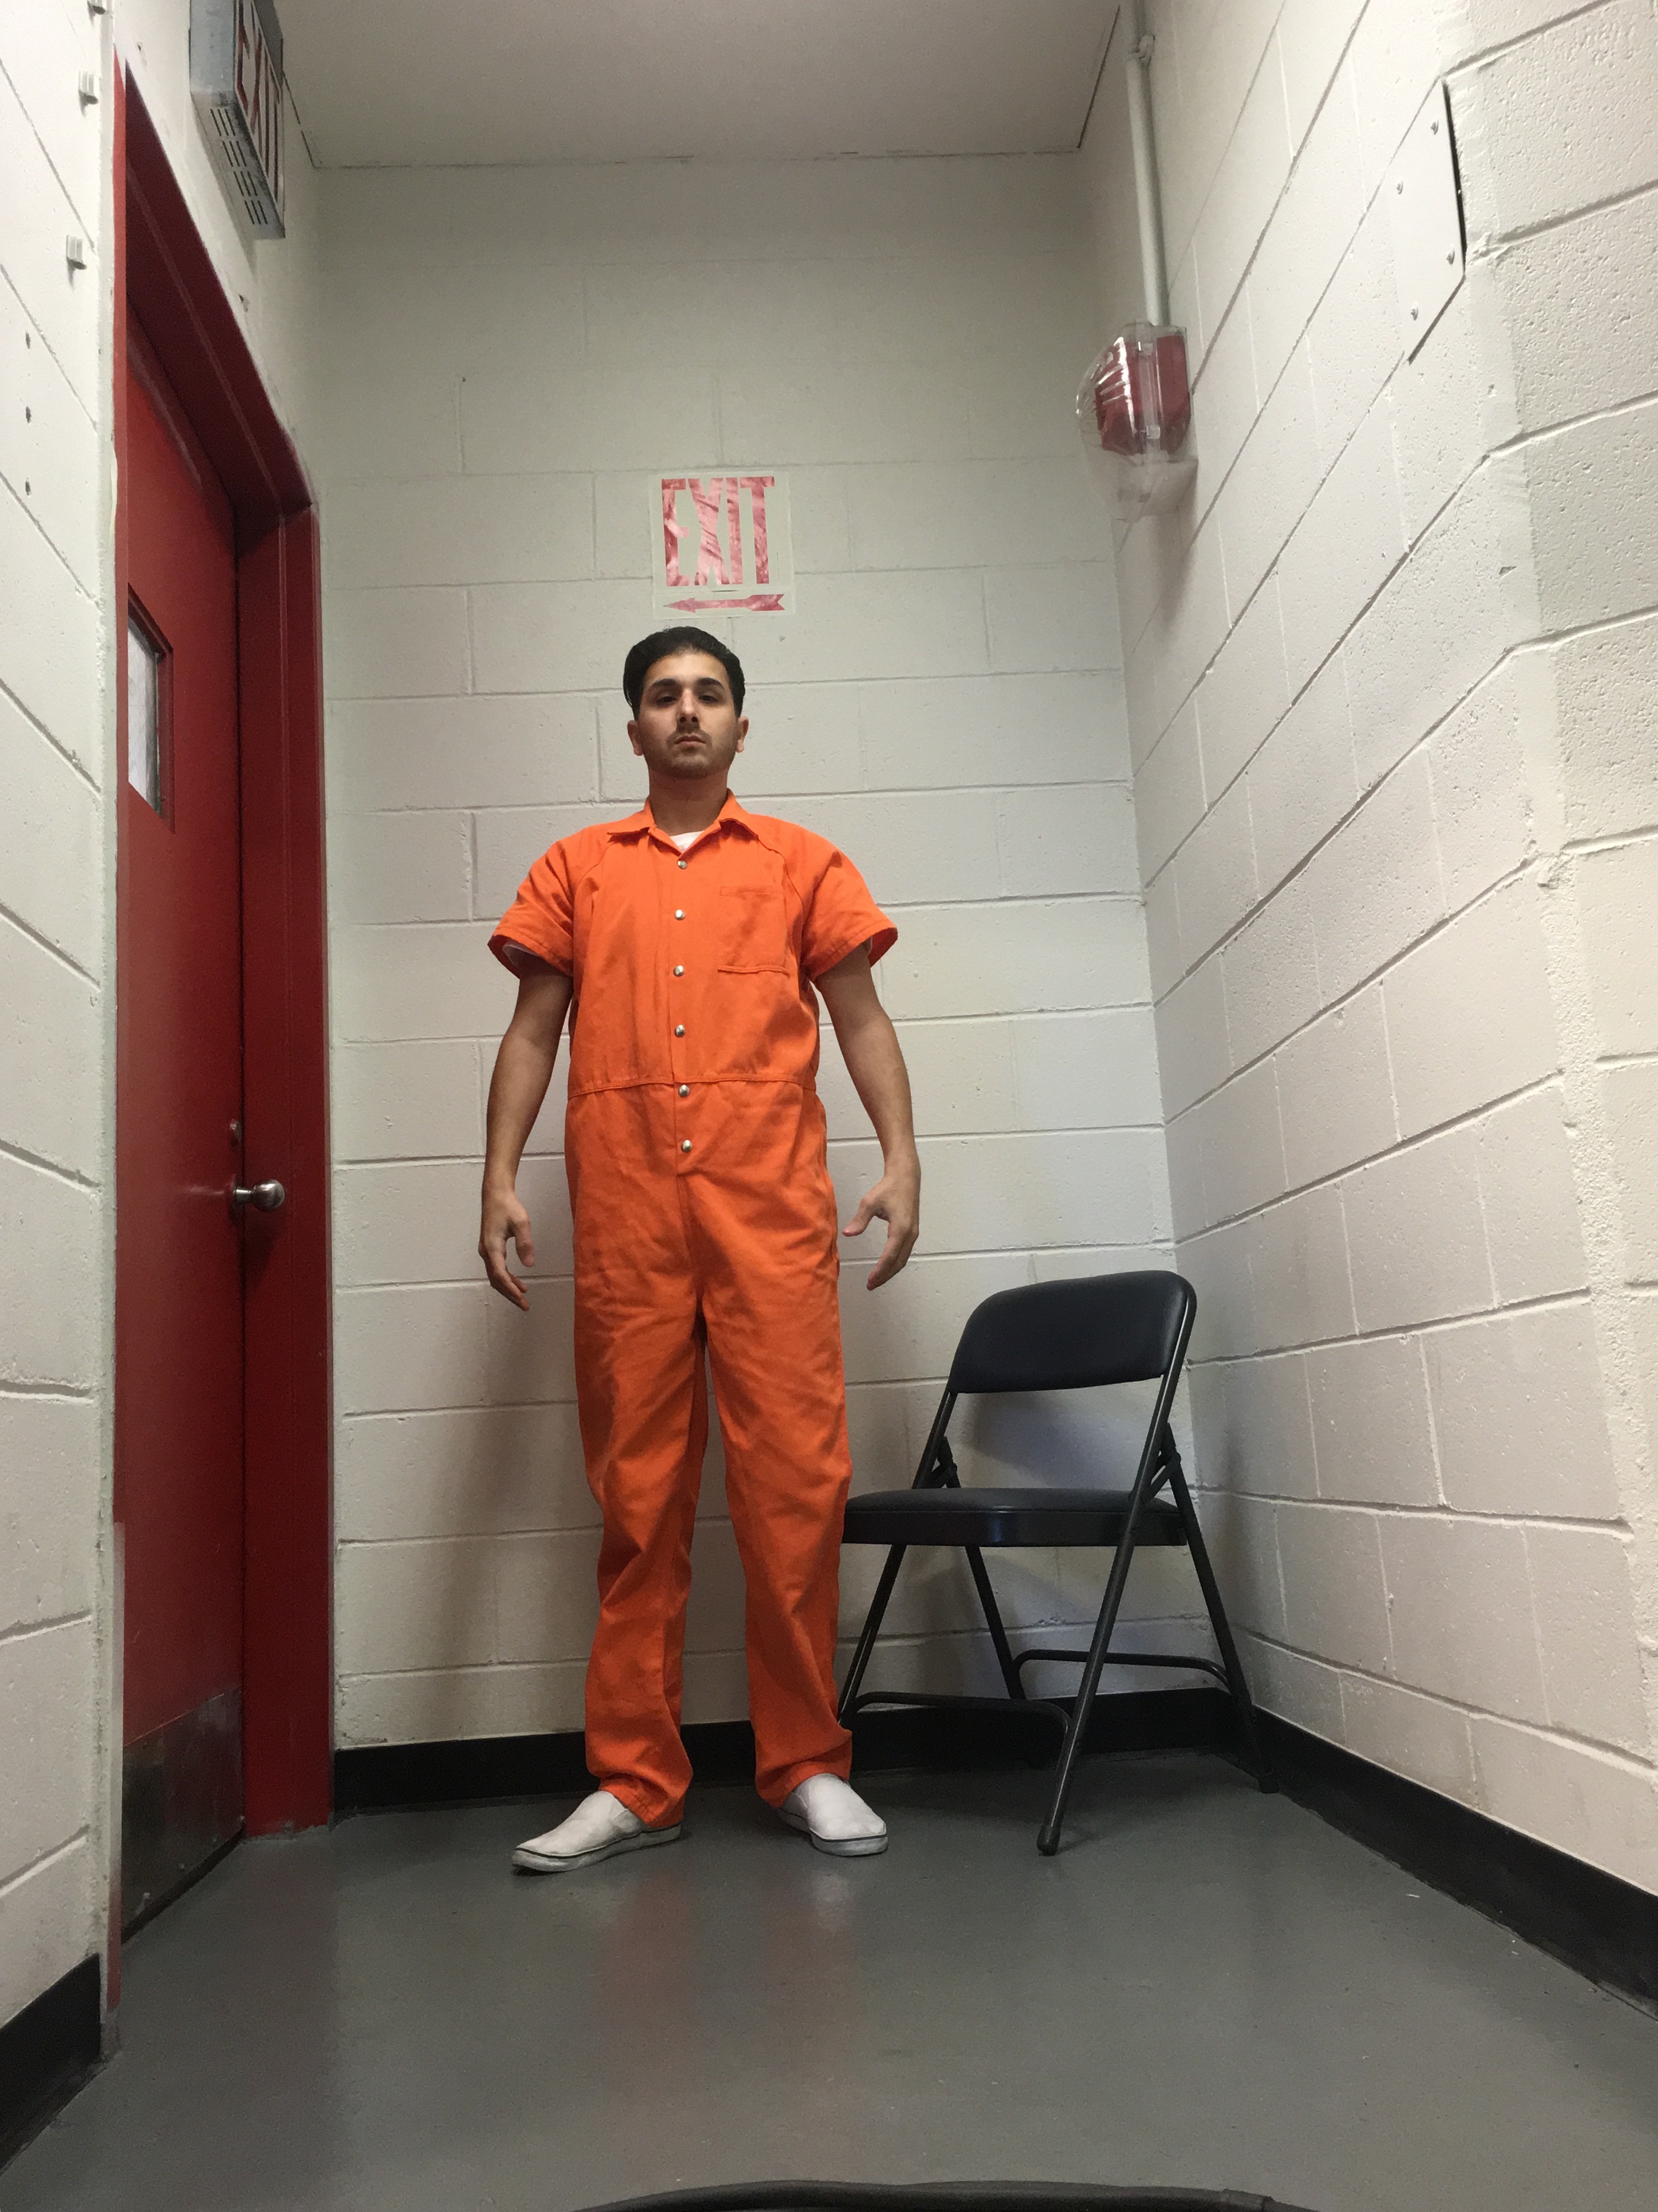 Me in jail on an upcoming Netflix series